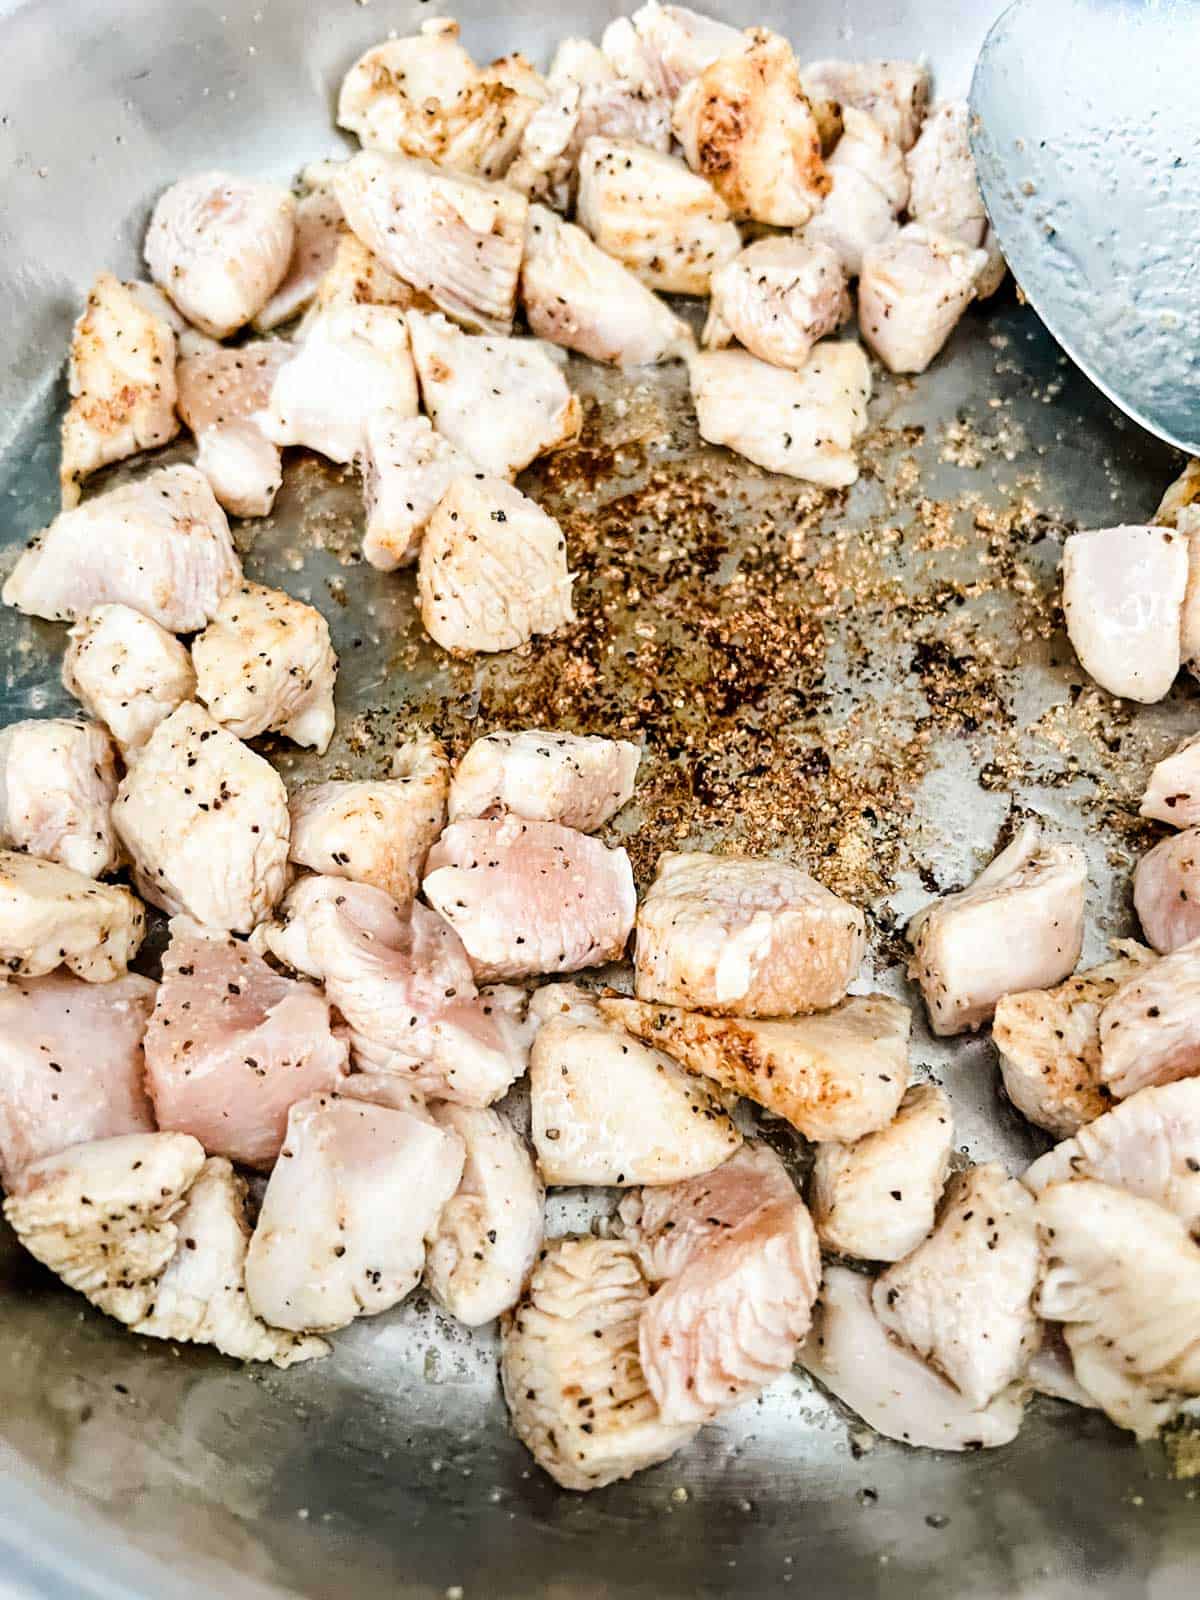 Photo of seasoned cubed chicken cooking in a skillet.